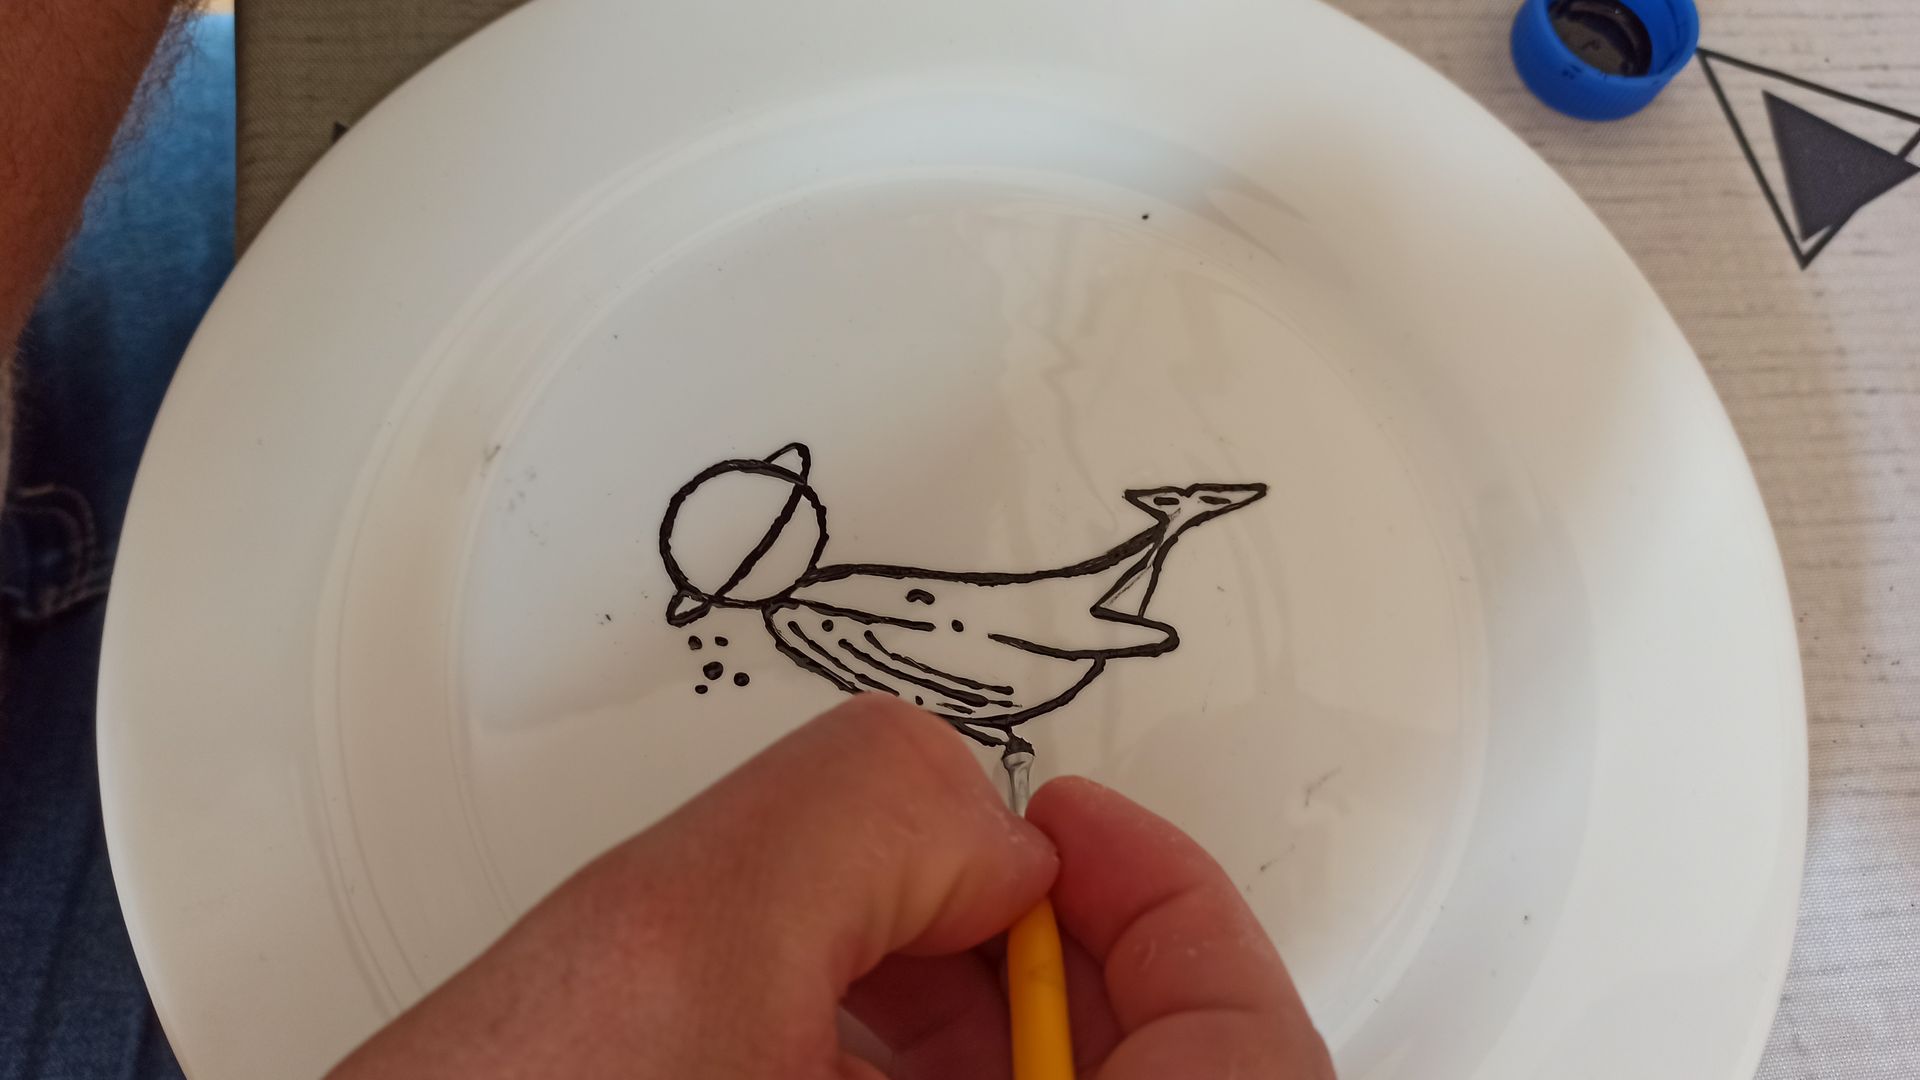 How to Paint a Plate